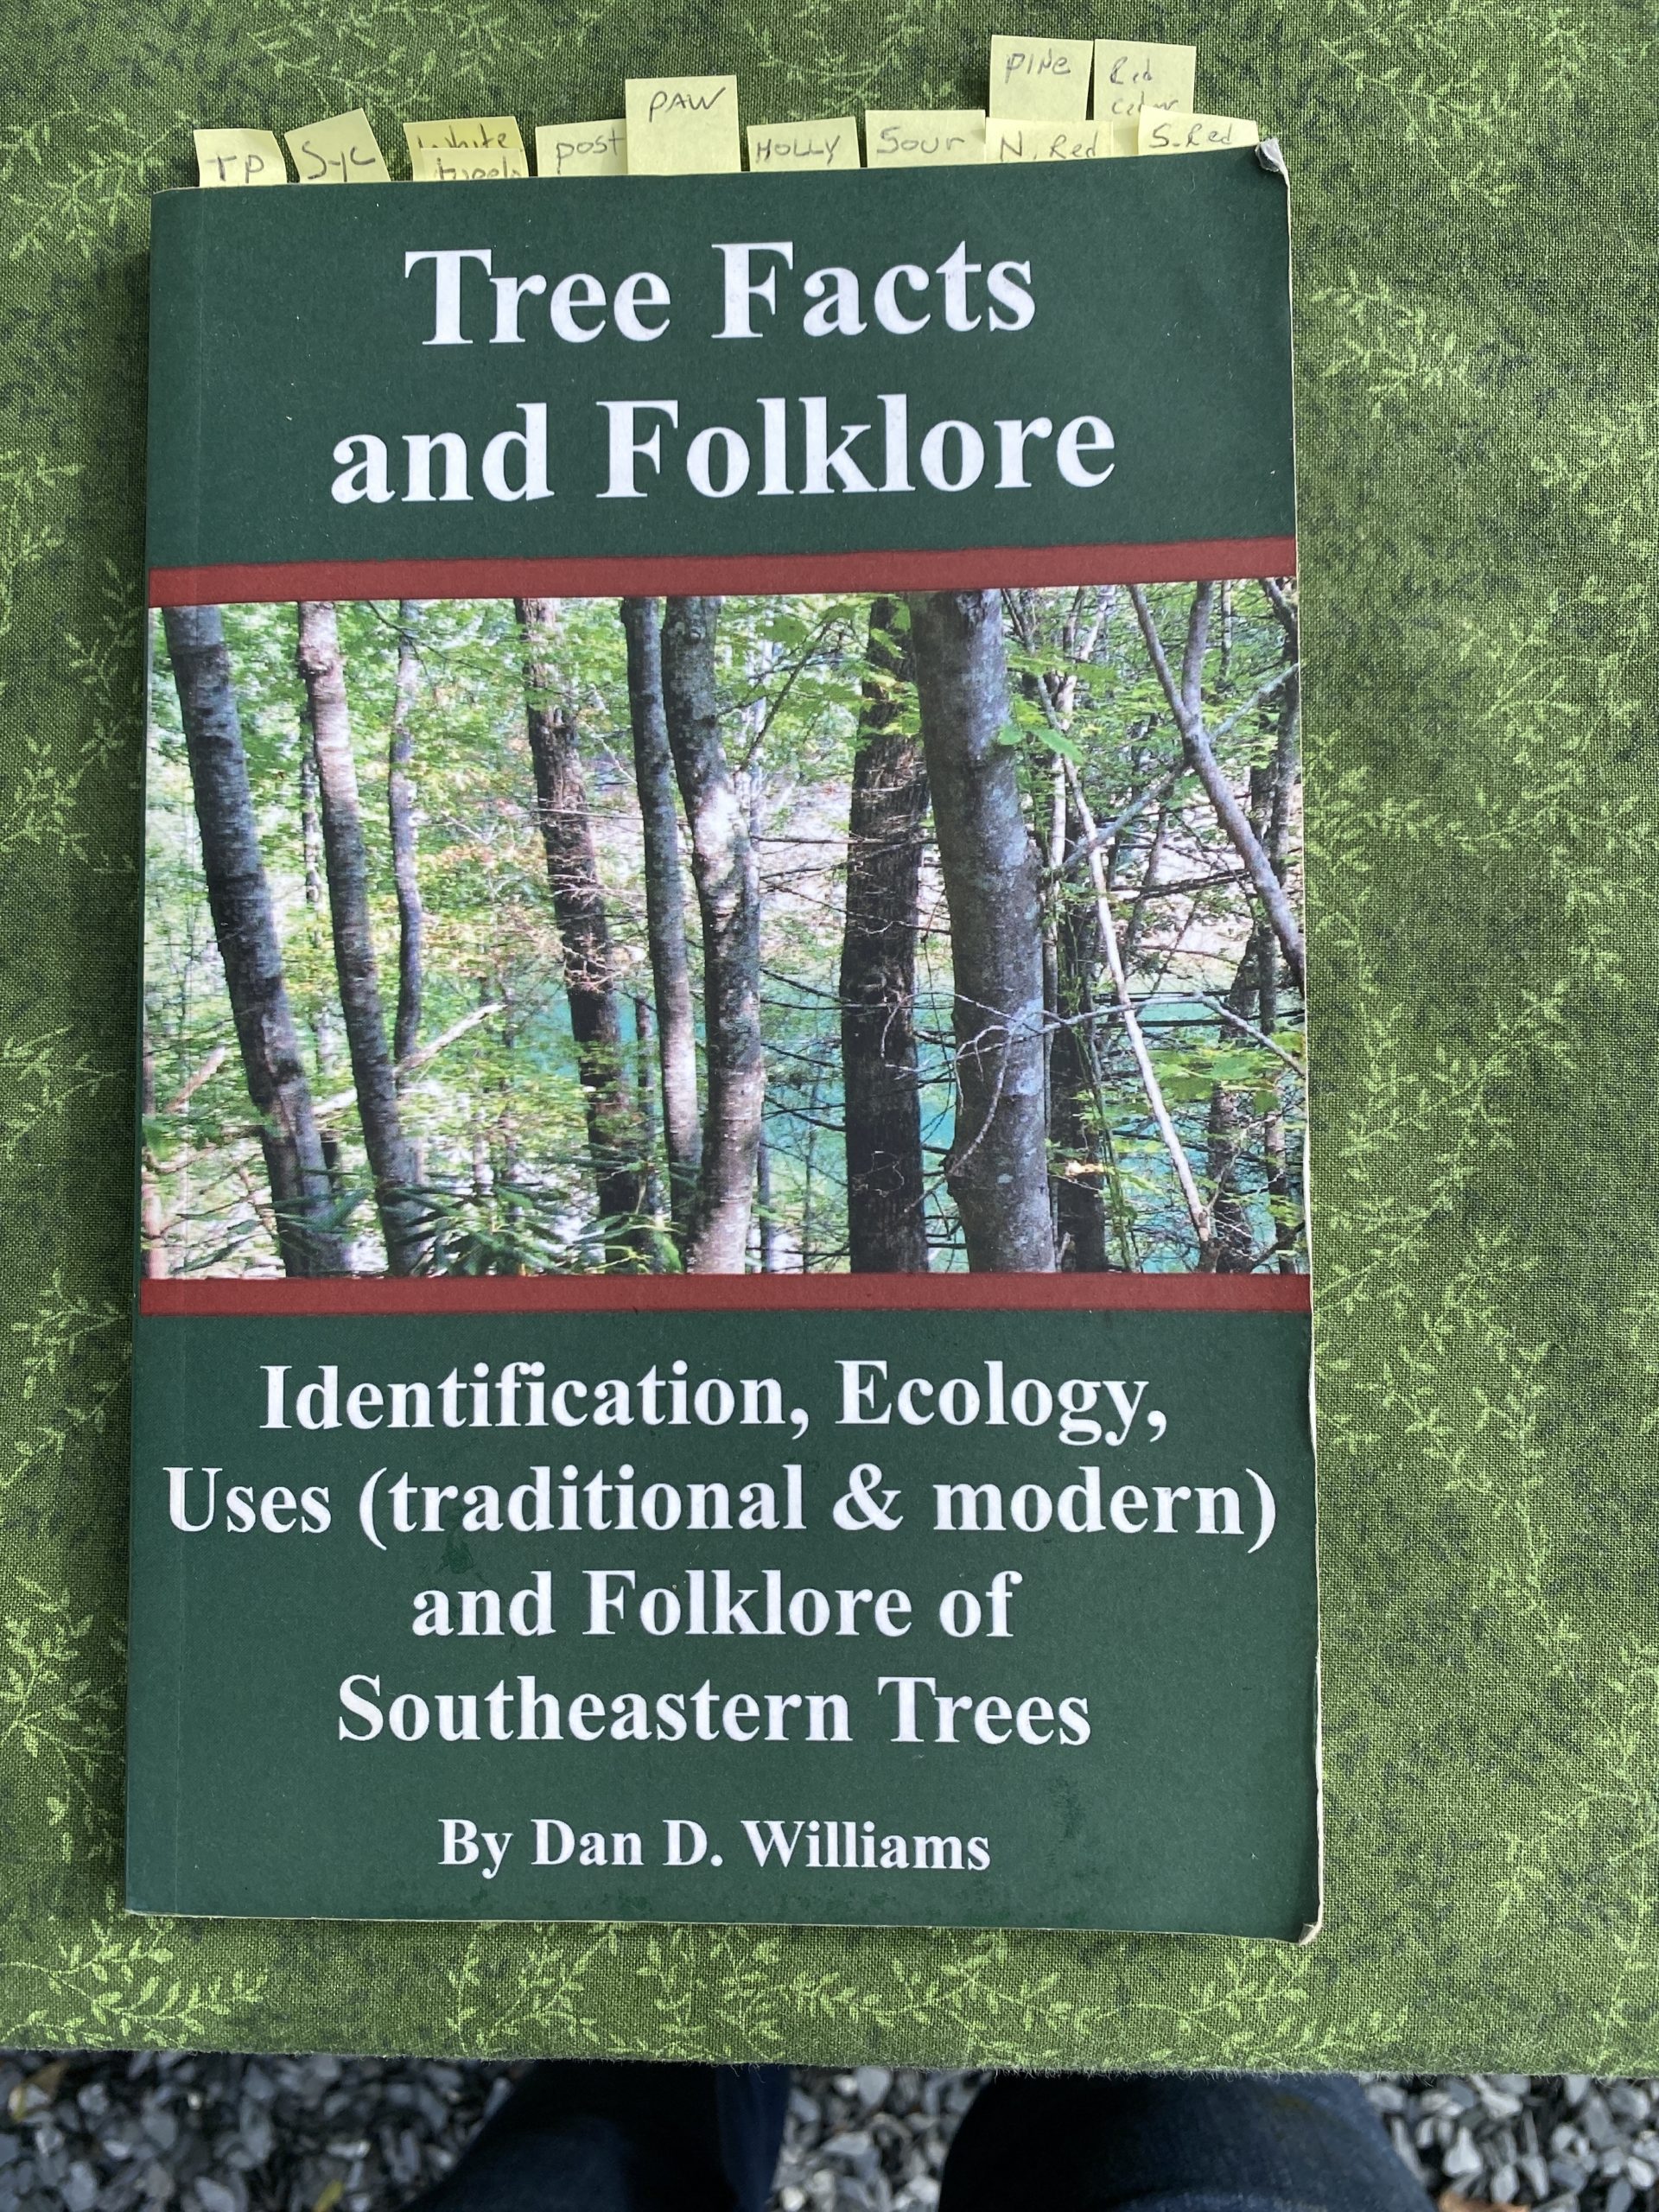 Tree Facts and Folklore: Identification, Ecology, Uses (traditional and modern) and Folklore of Southeastern Trees by Dan D. Williams